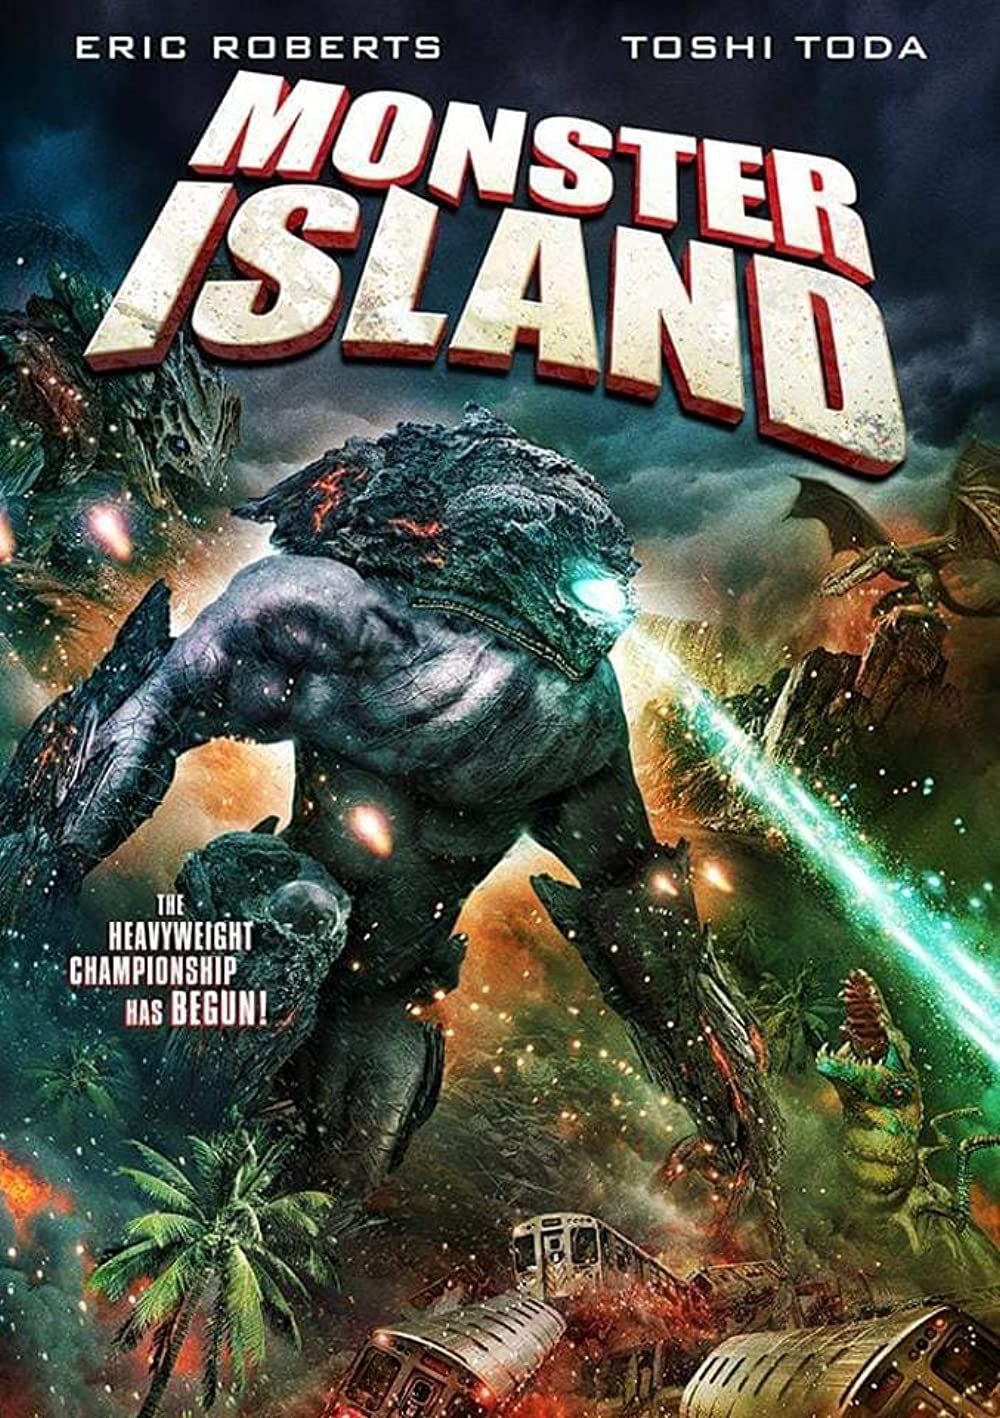 Monster Island (2019) Hindi ORG Dubbed BluRay download full movie